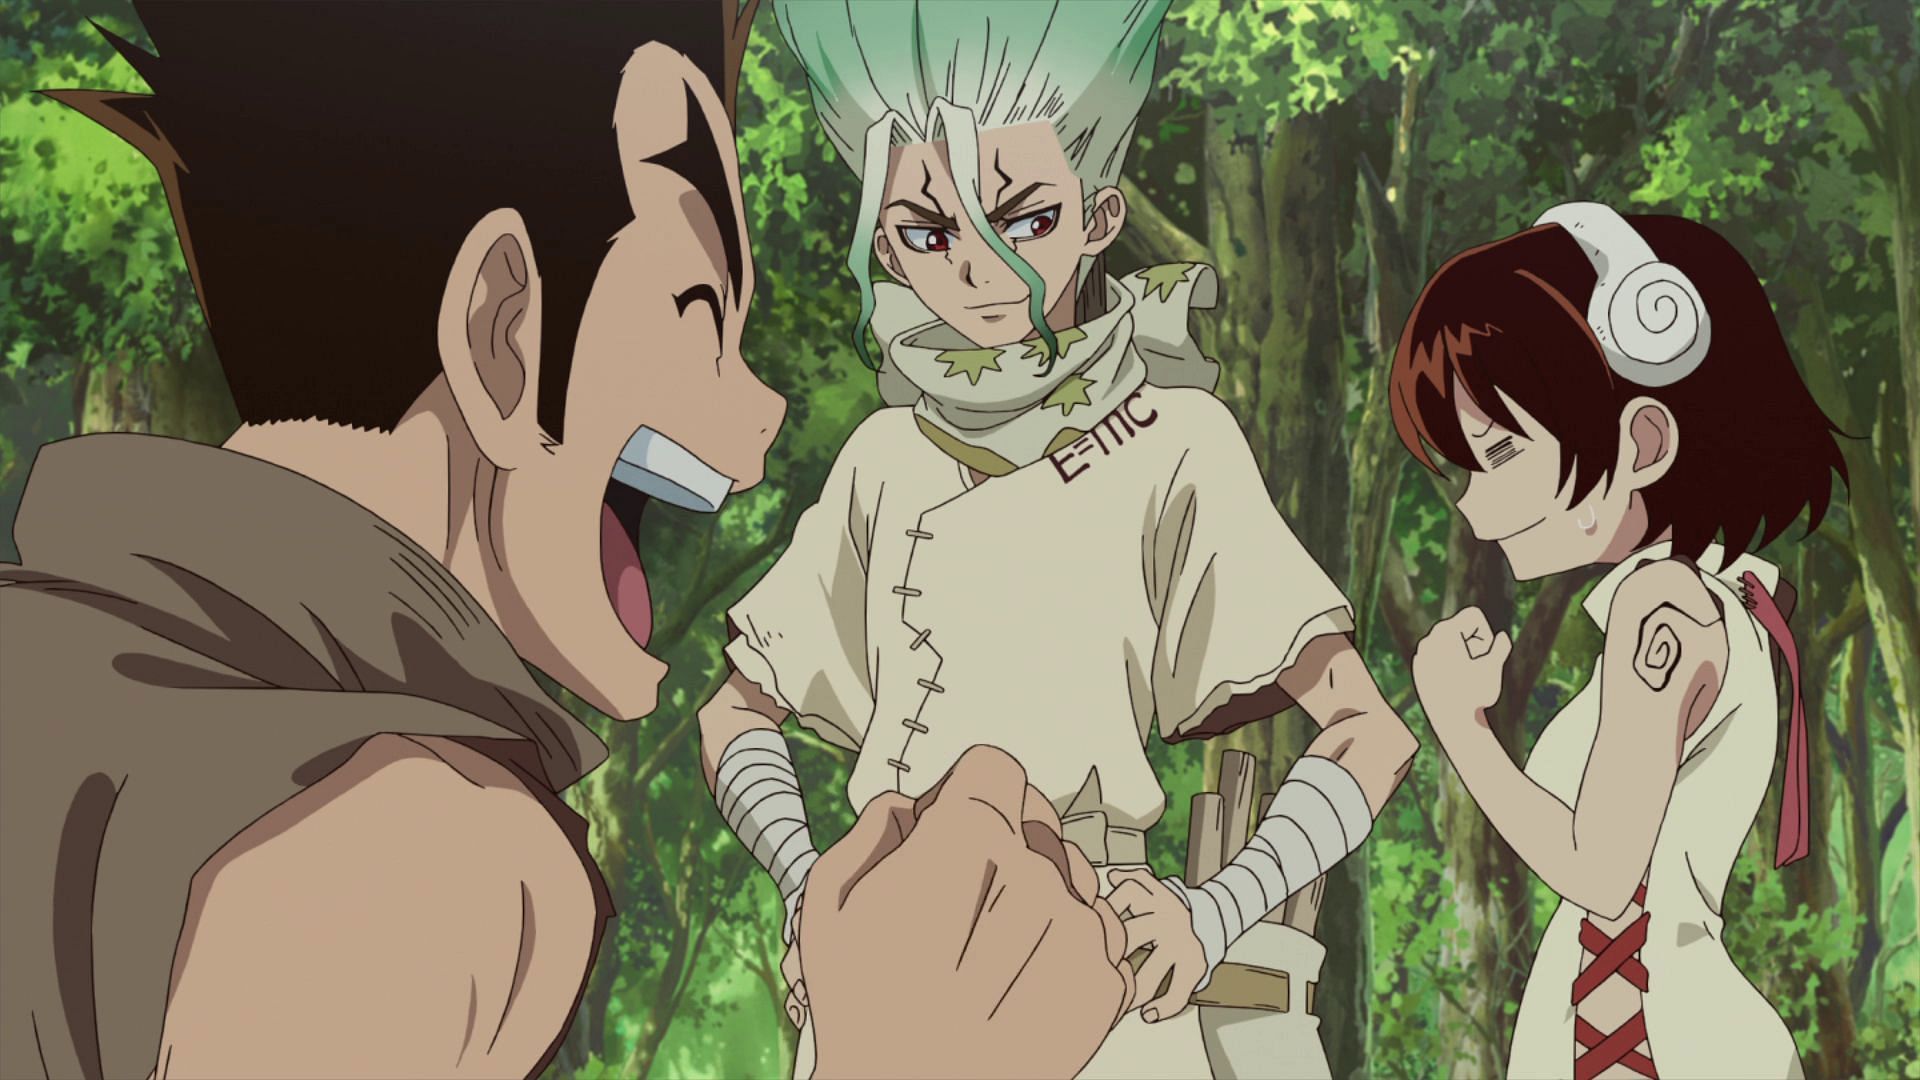 Dr Stone Season 3 Episode 2 Review: Another Milestone Achieved